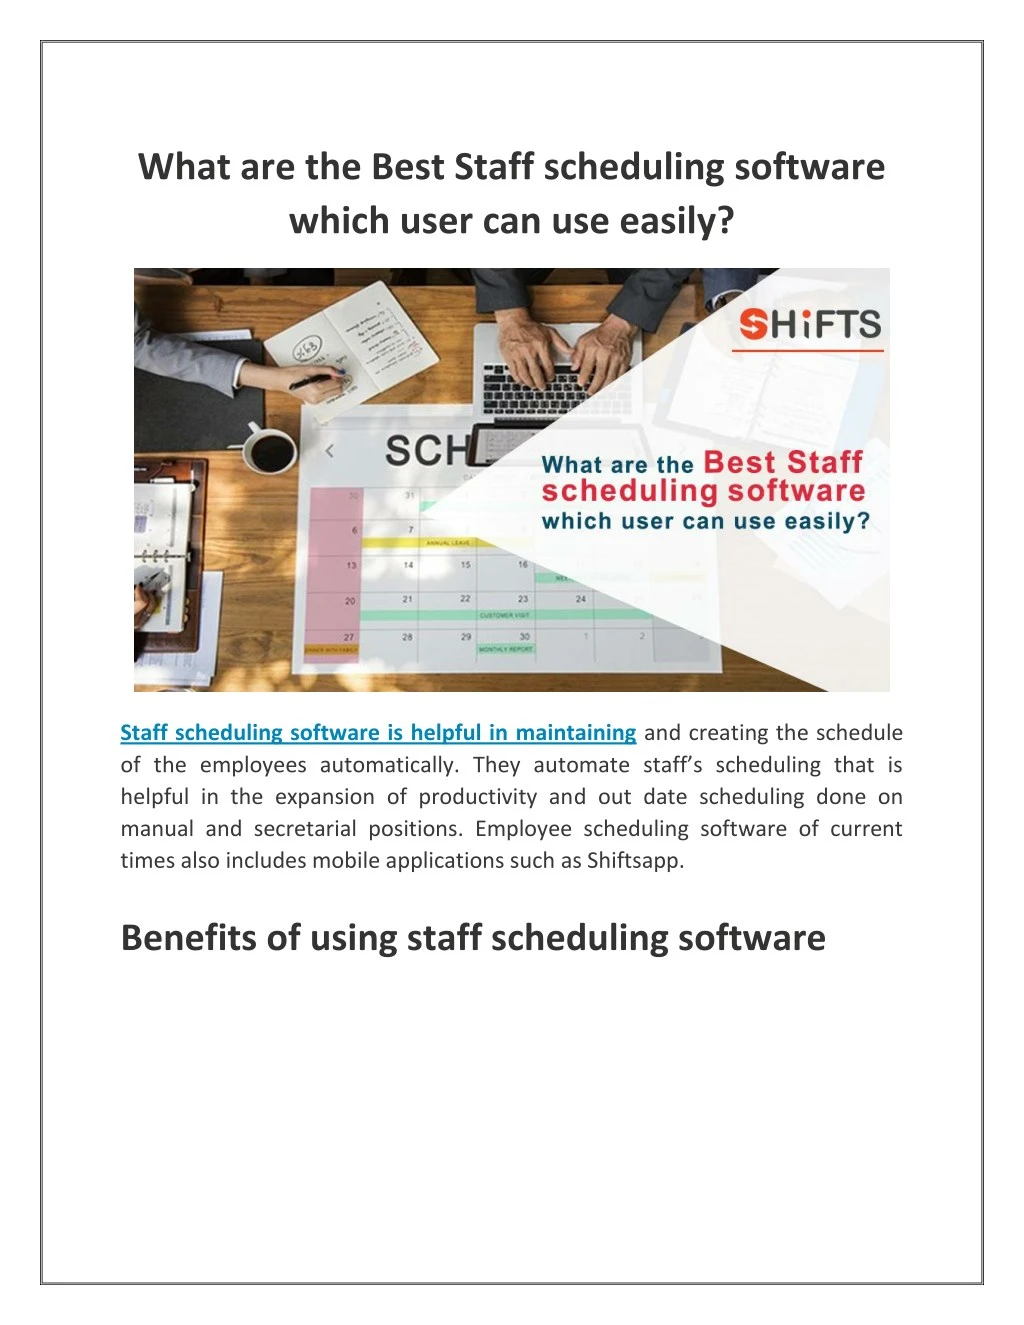 what are the best staff scheduling software which